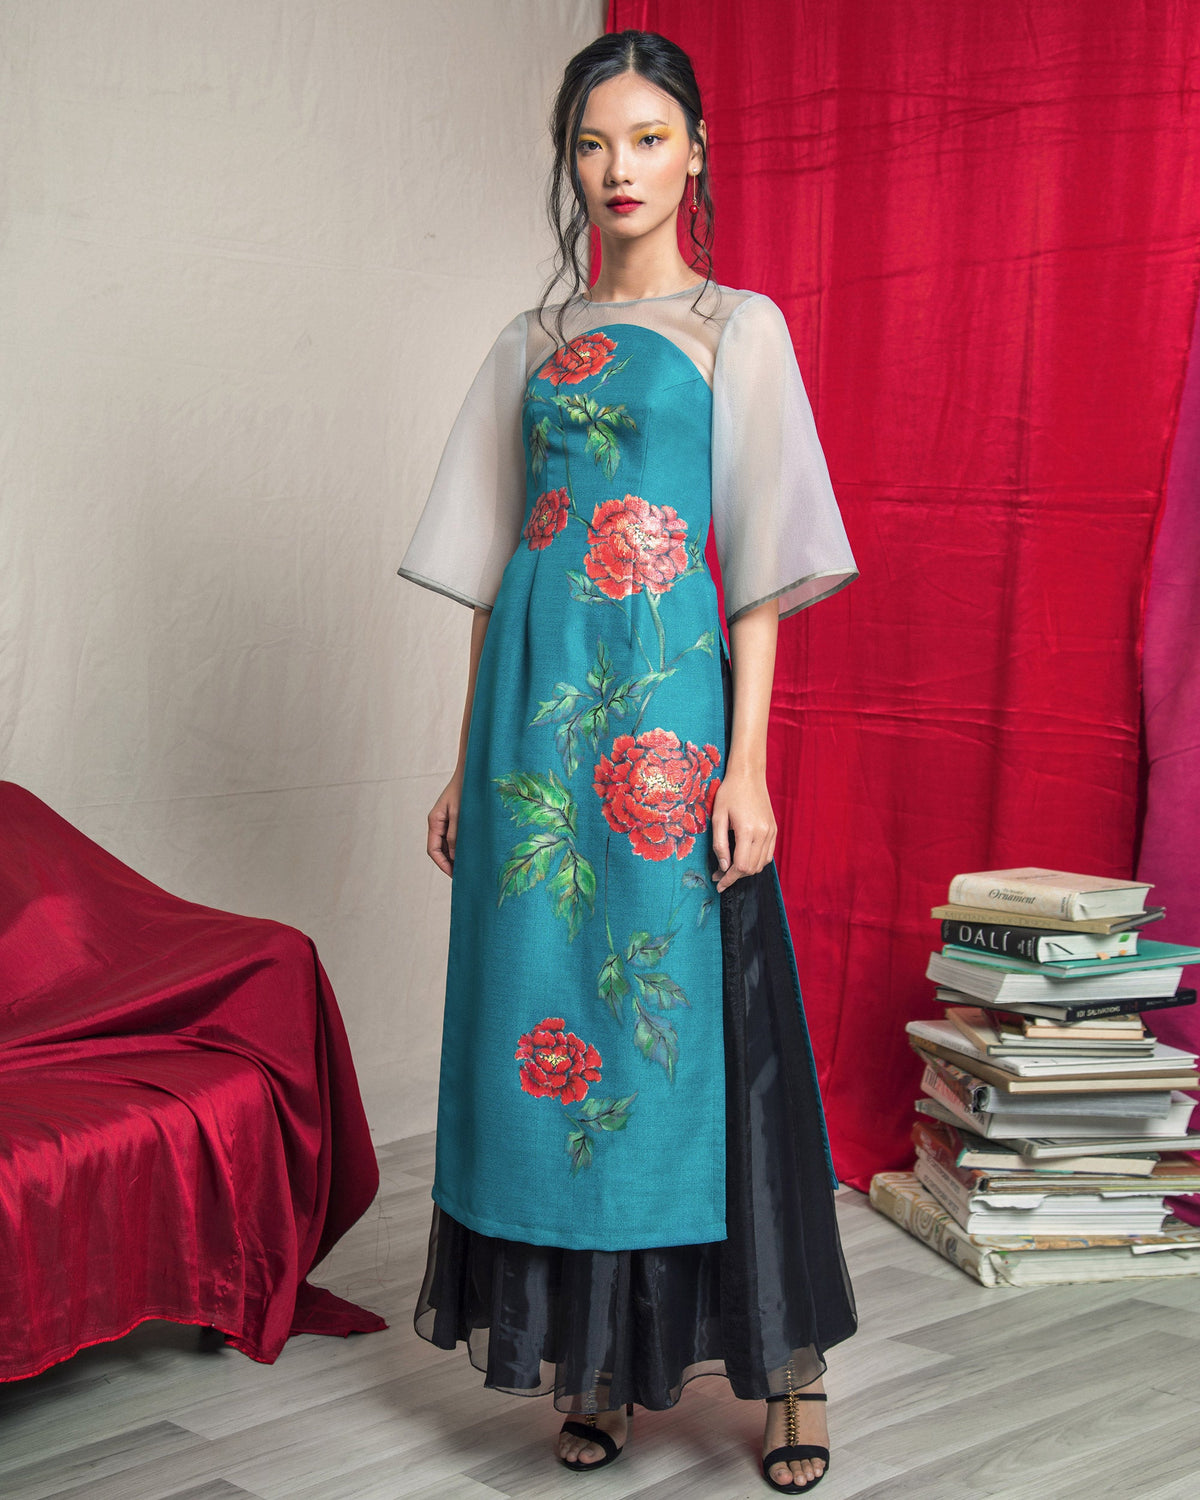 TinyInk-LN18-prussian-blue-hand-painted-peony-contemporary-aodai